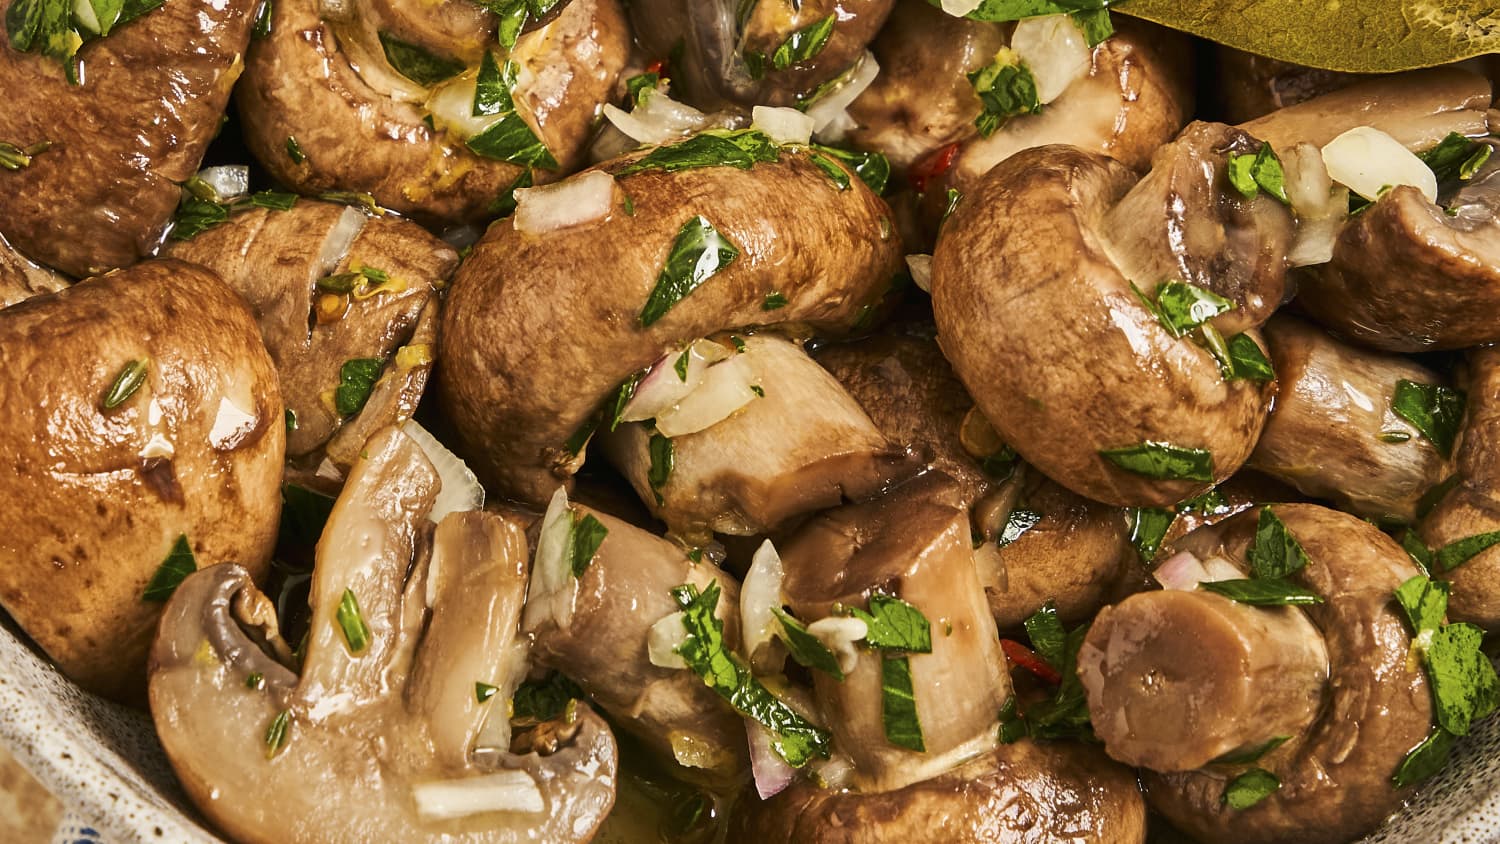 Frank and Sal Mixed Marinated Mushrooms in Oil - Product of Italy